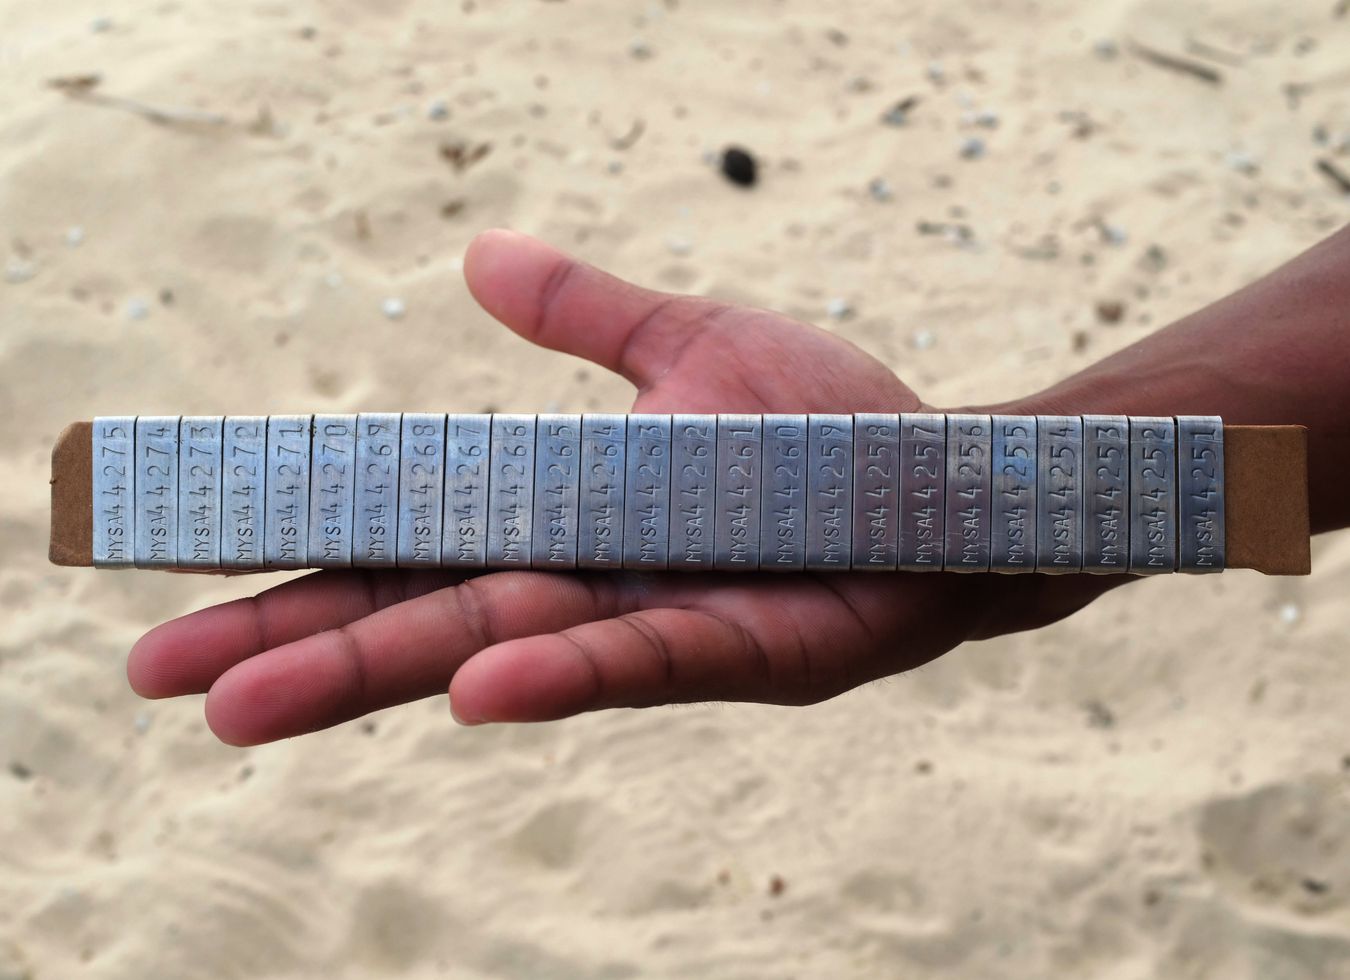 Metal plates with control and tracking number that will be inserted in the front flippers of sea turtles. 